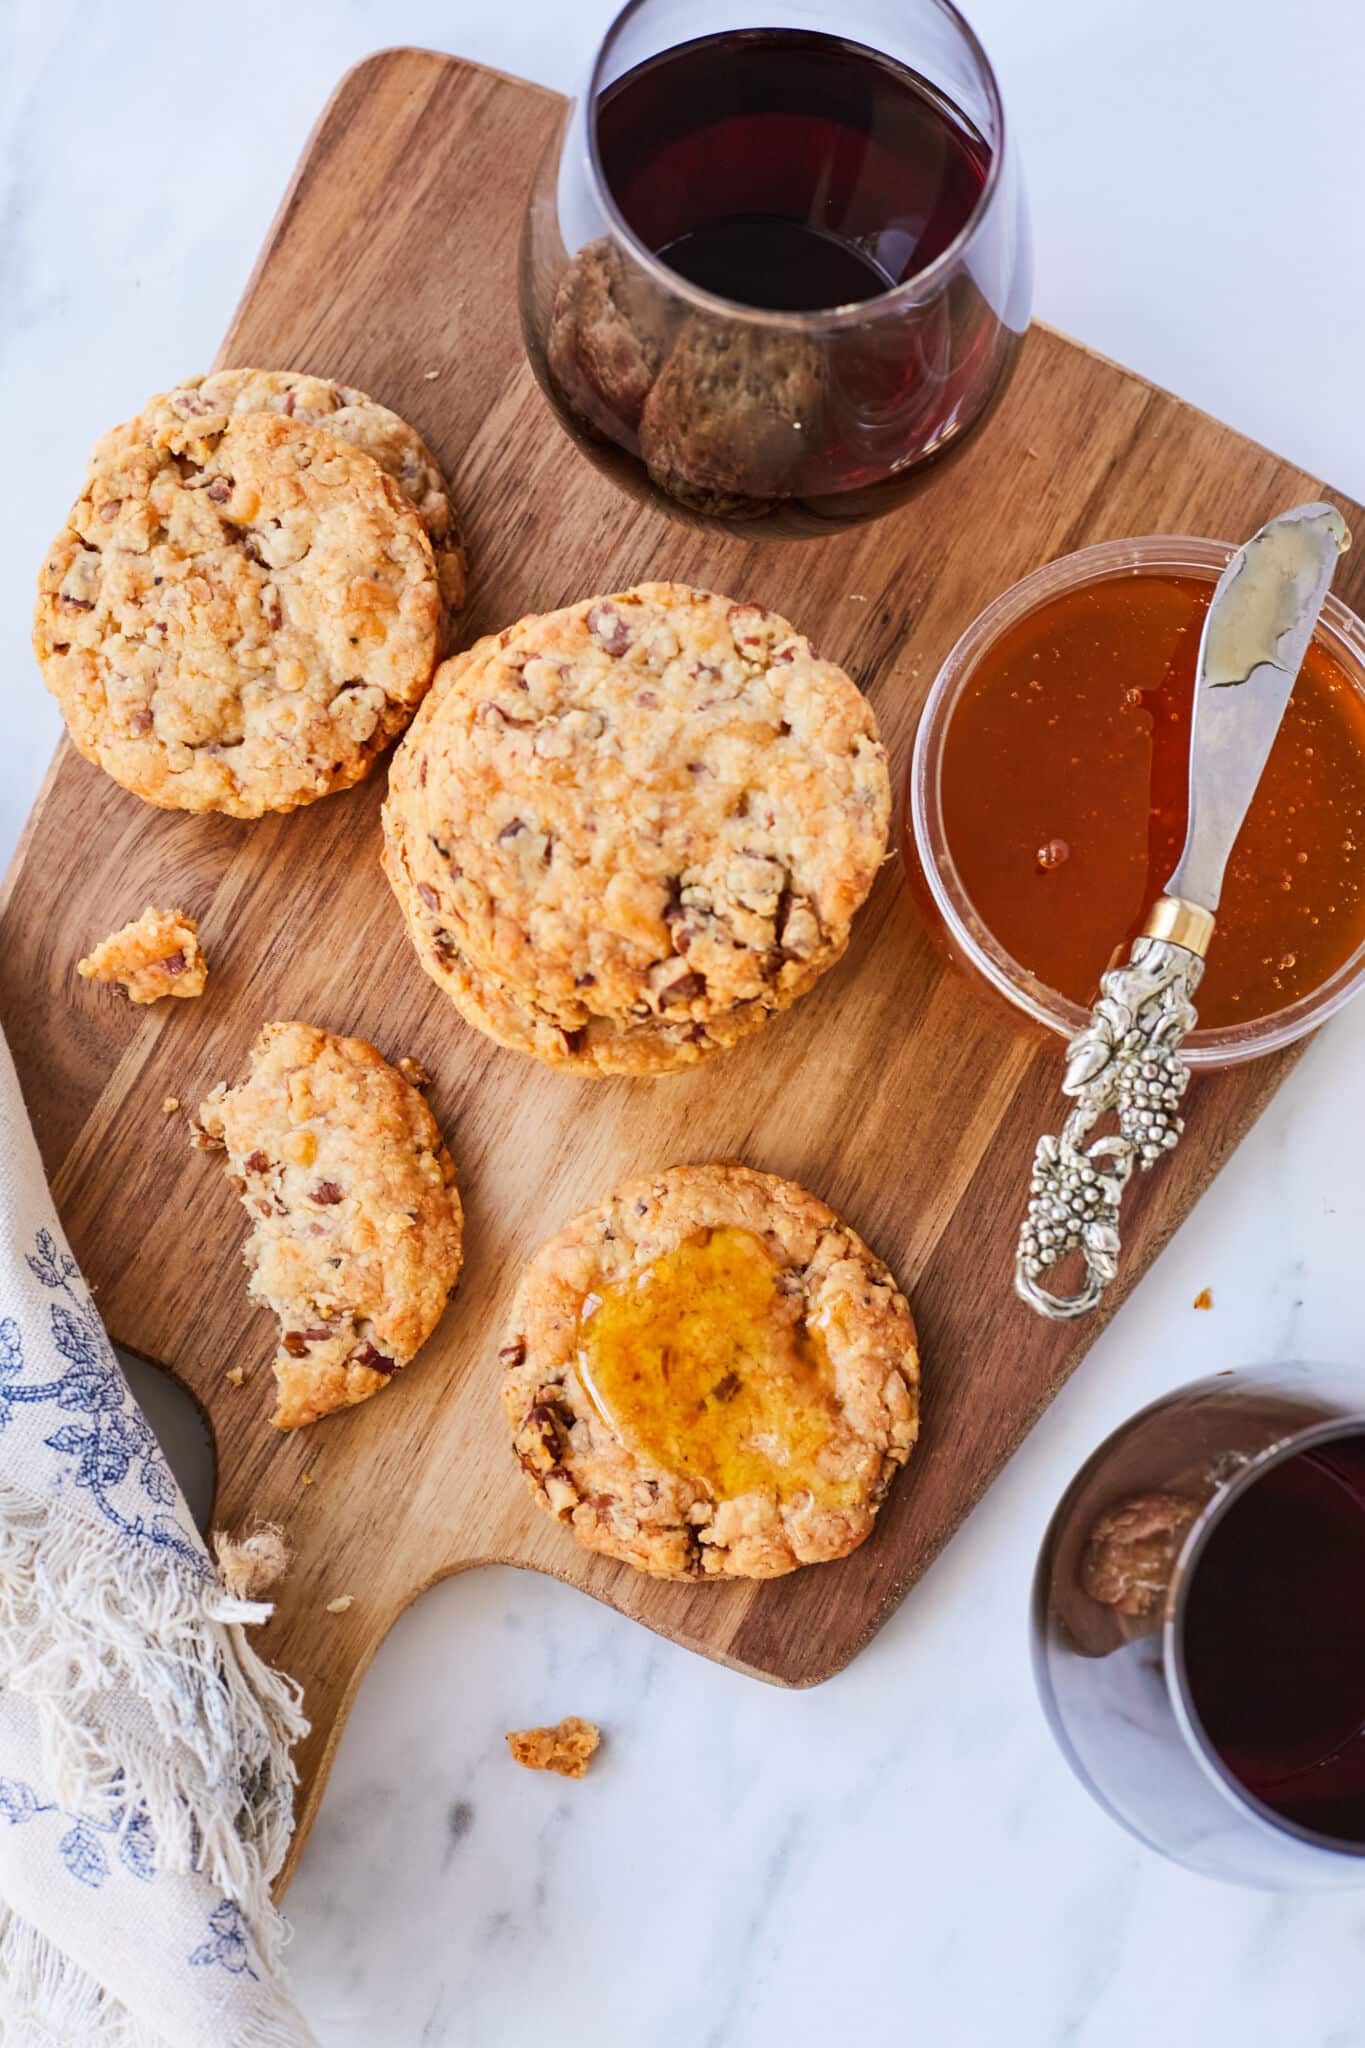 How to enjoy Cheddar Pecan Savory Shortbread Cookies with wine and honey